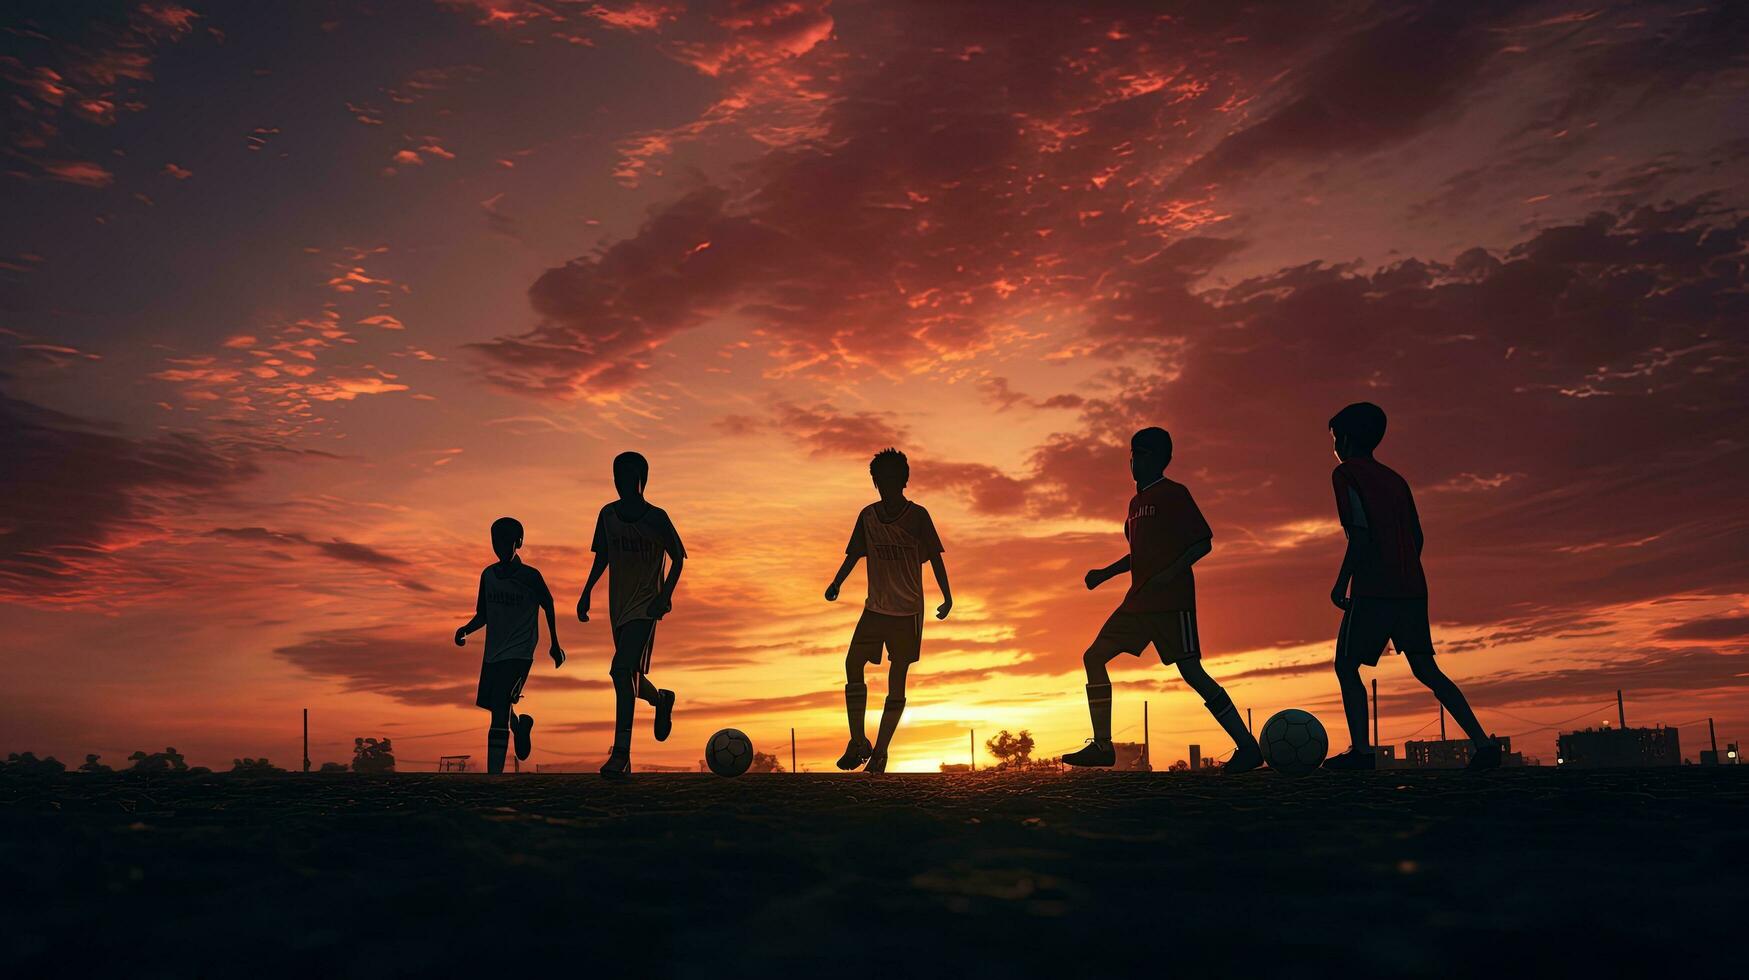 Football players shadows on the evening sky. silhouette concept photo